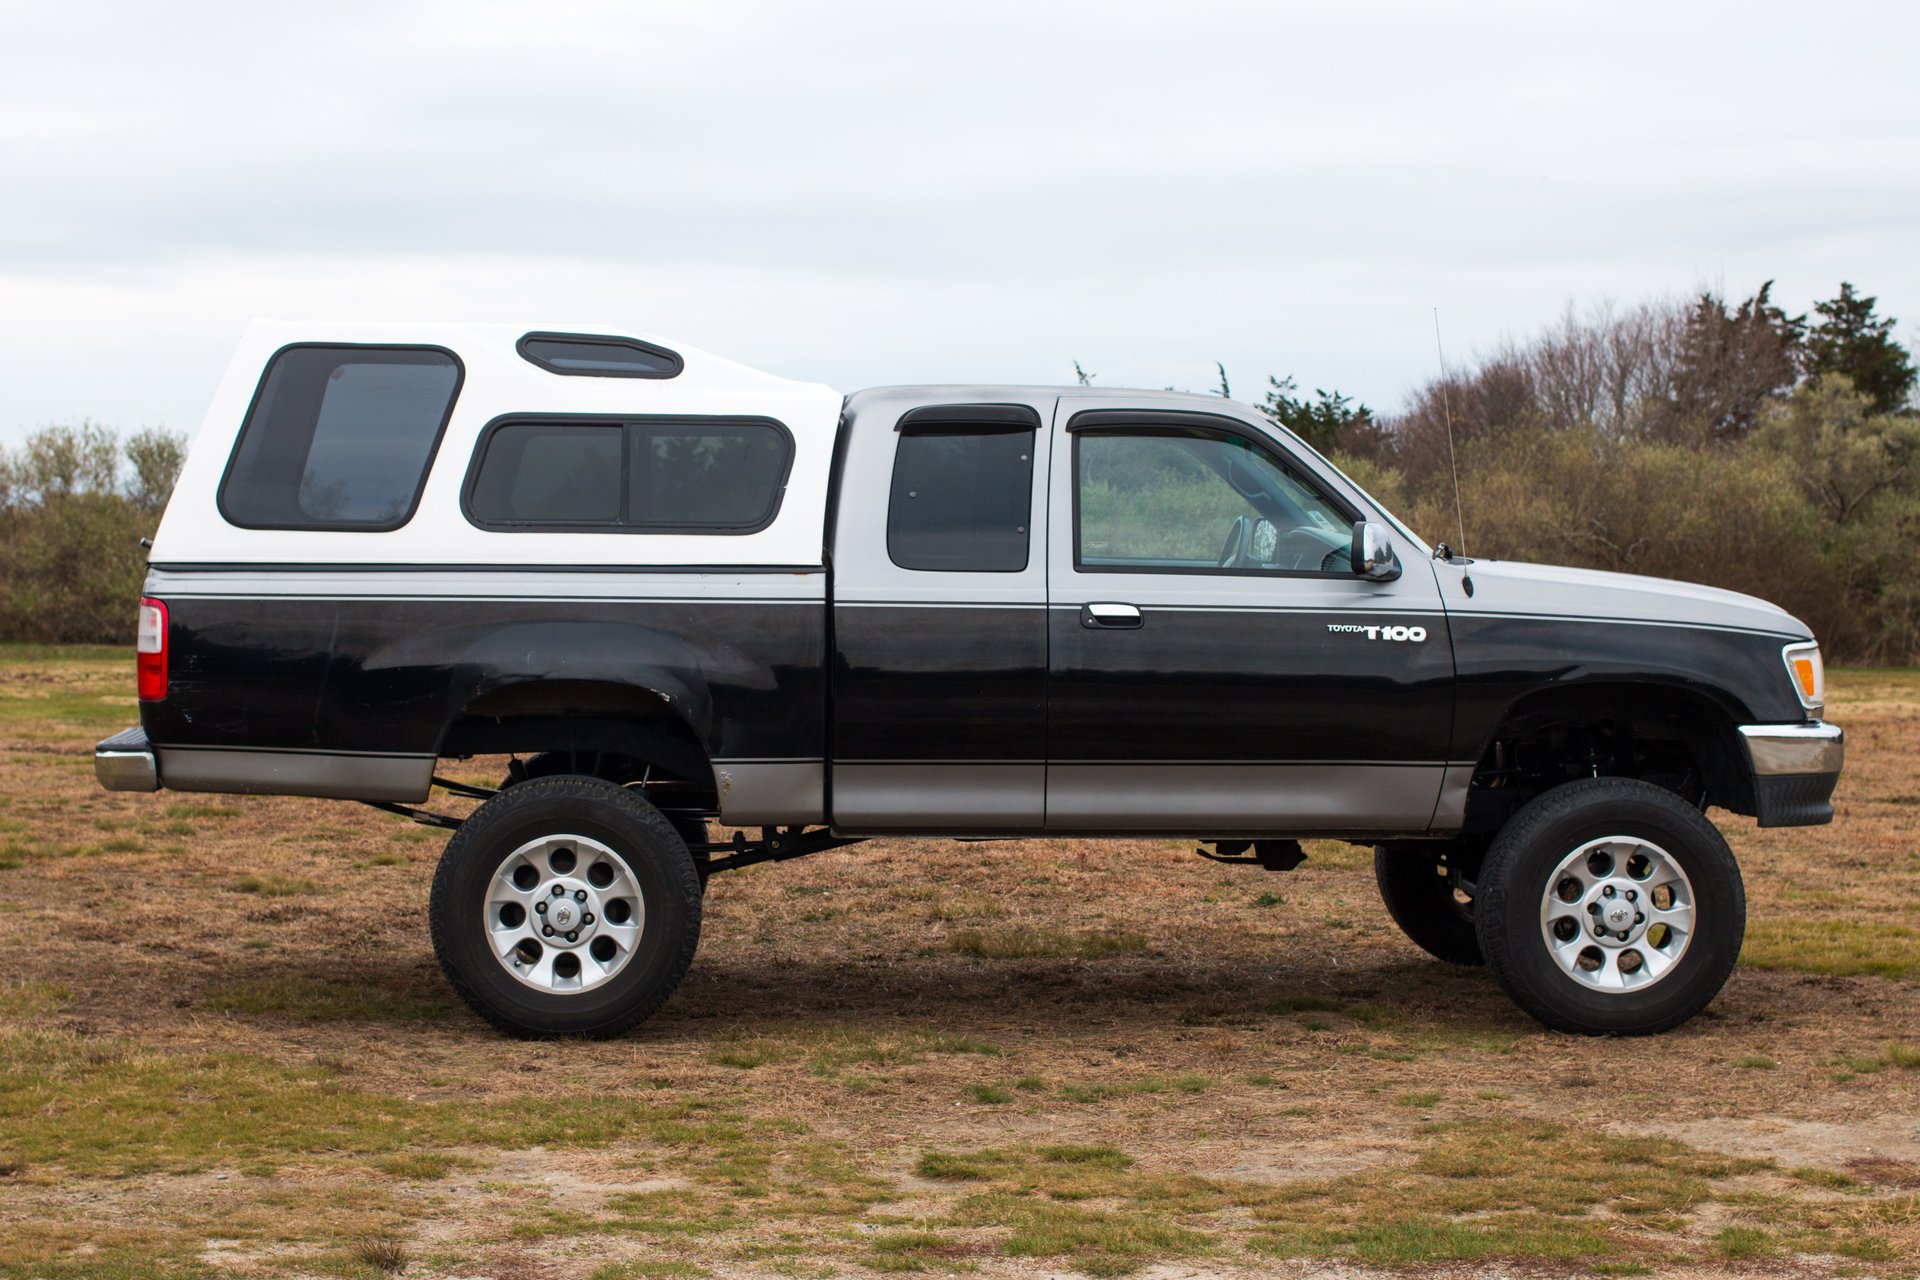 My Full Build - 1997 Toyota T100 - 5" Lift, 33's, All new IFS, & More |  Toyota Nation Forum